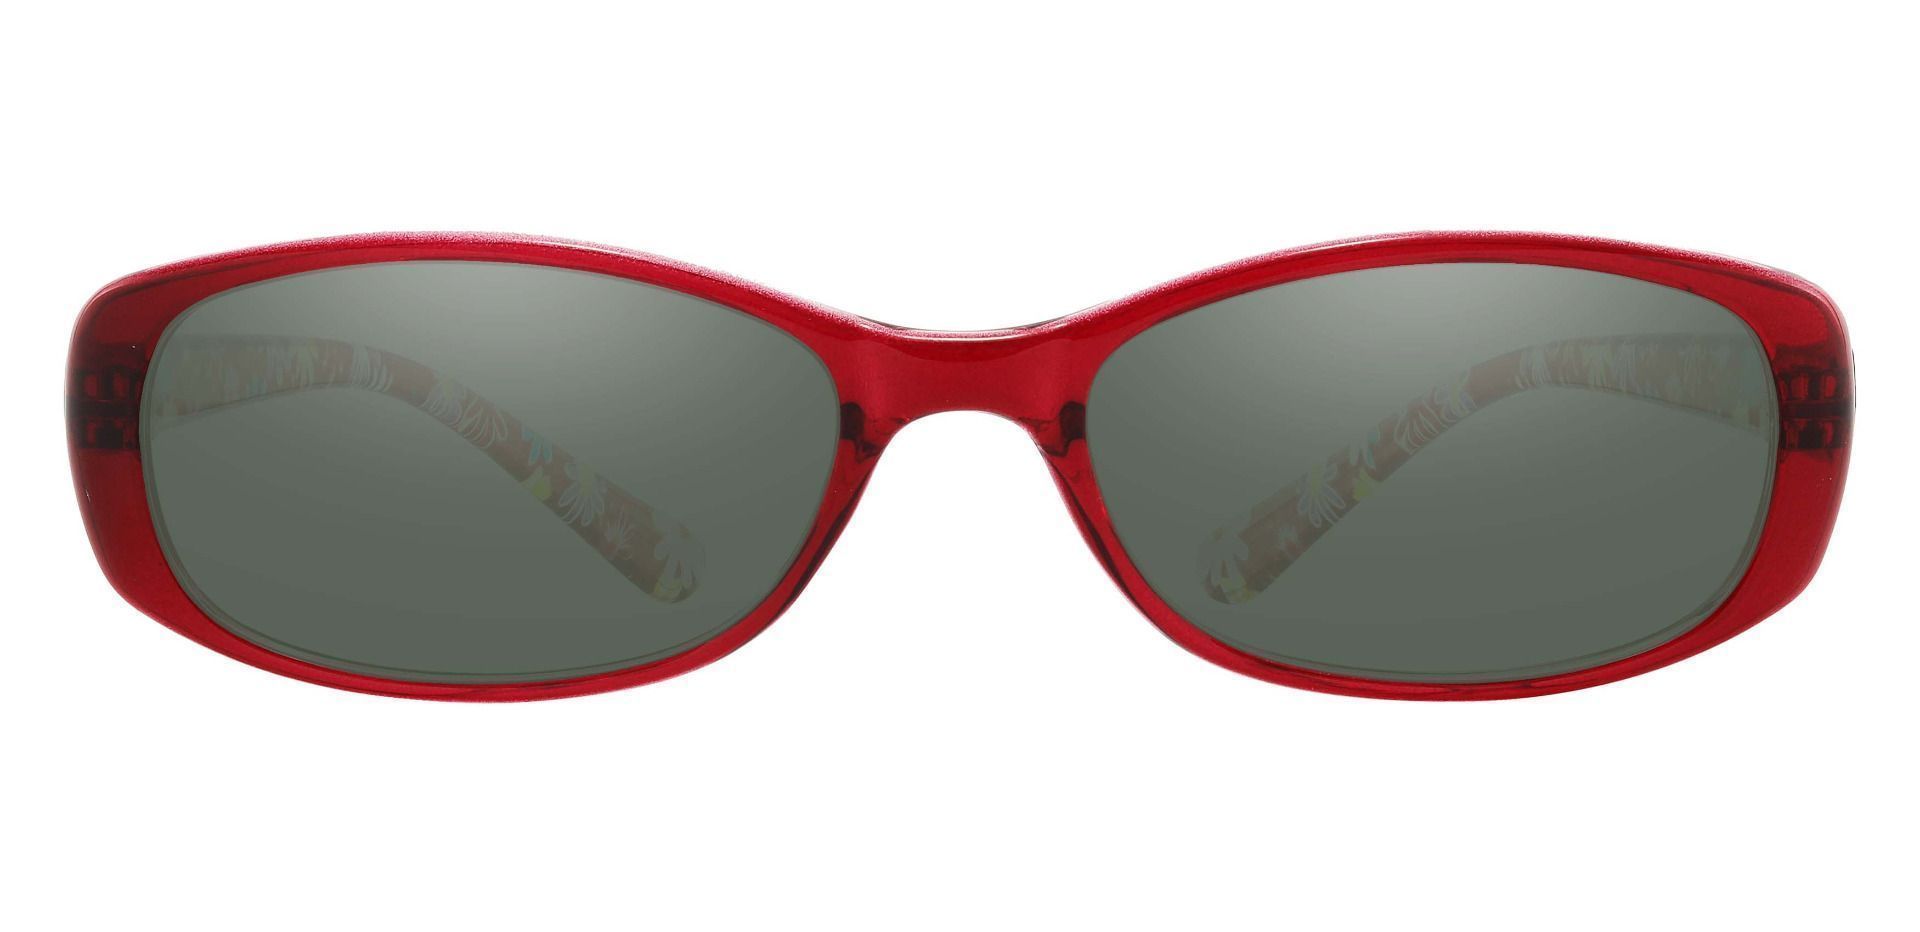 Bethesda Rectangle Non-Rx Sunglasses - Red Frame With Green Lenses